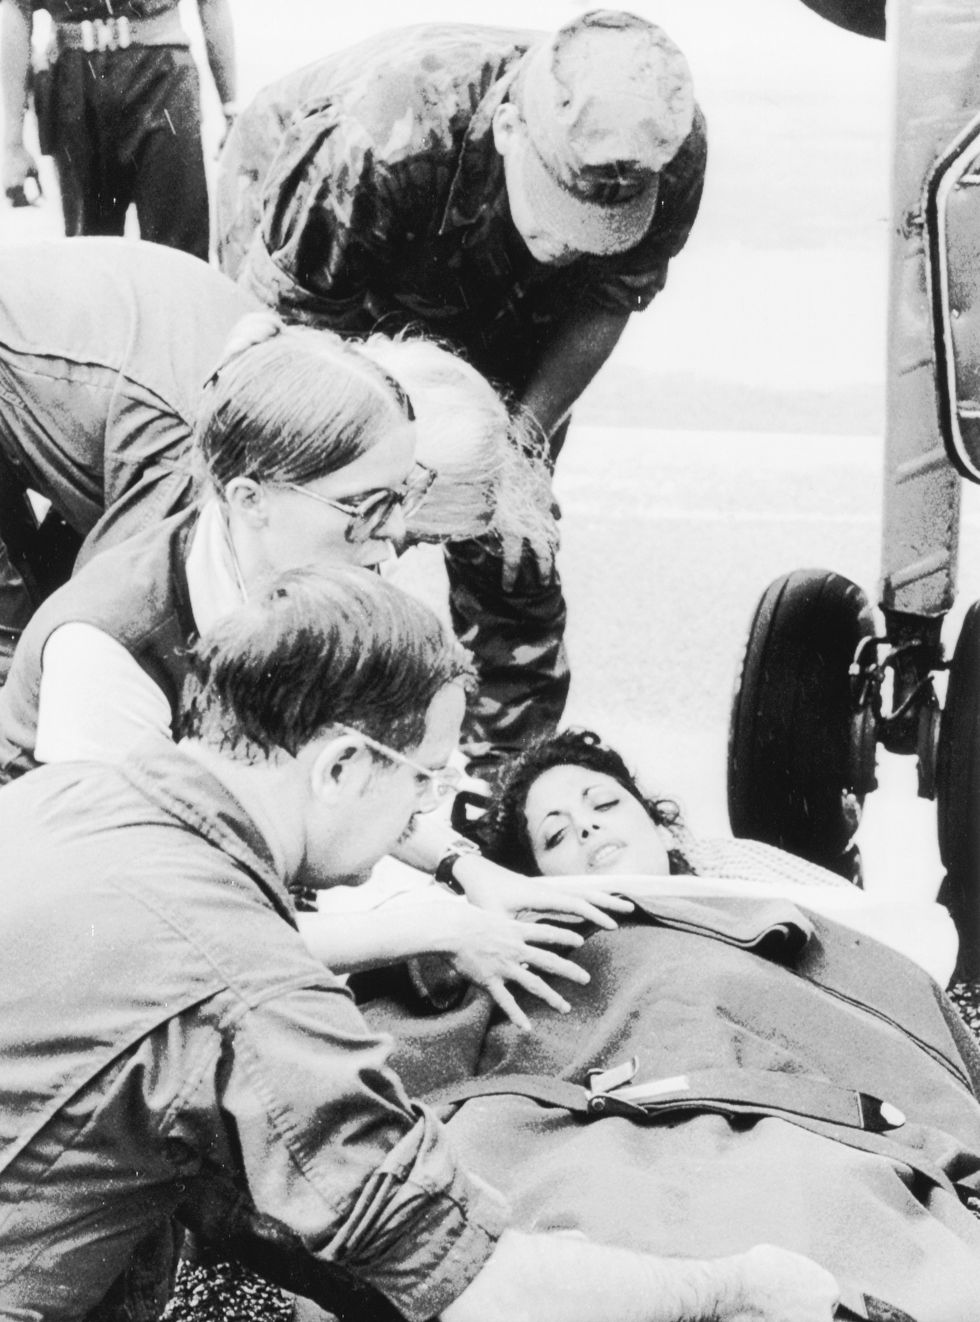 jackie speier lying on a stretcher after being taken off an airplane